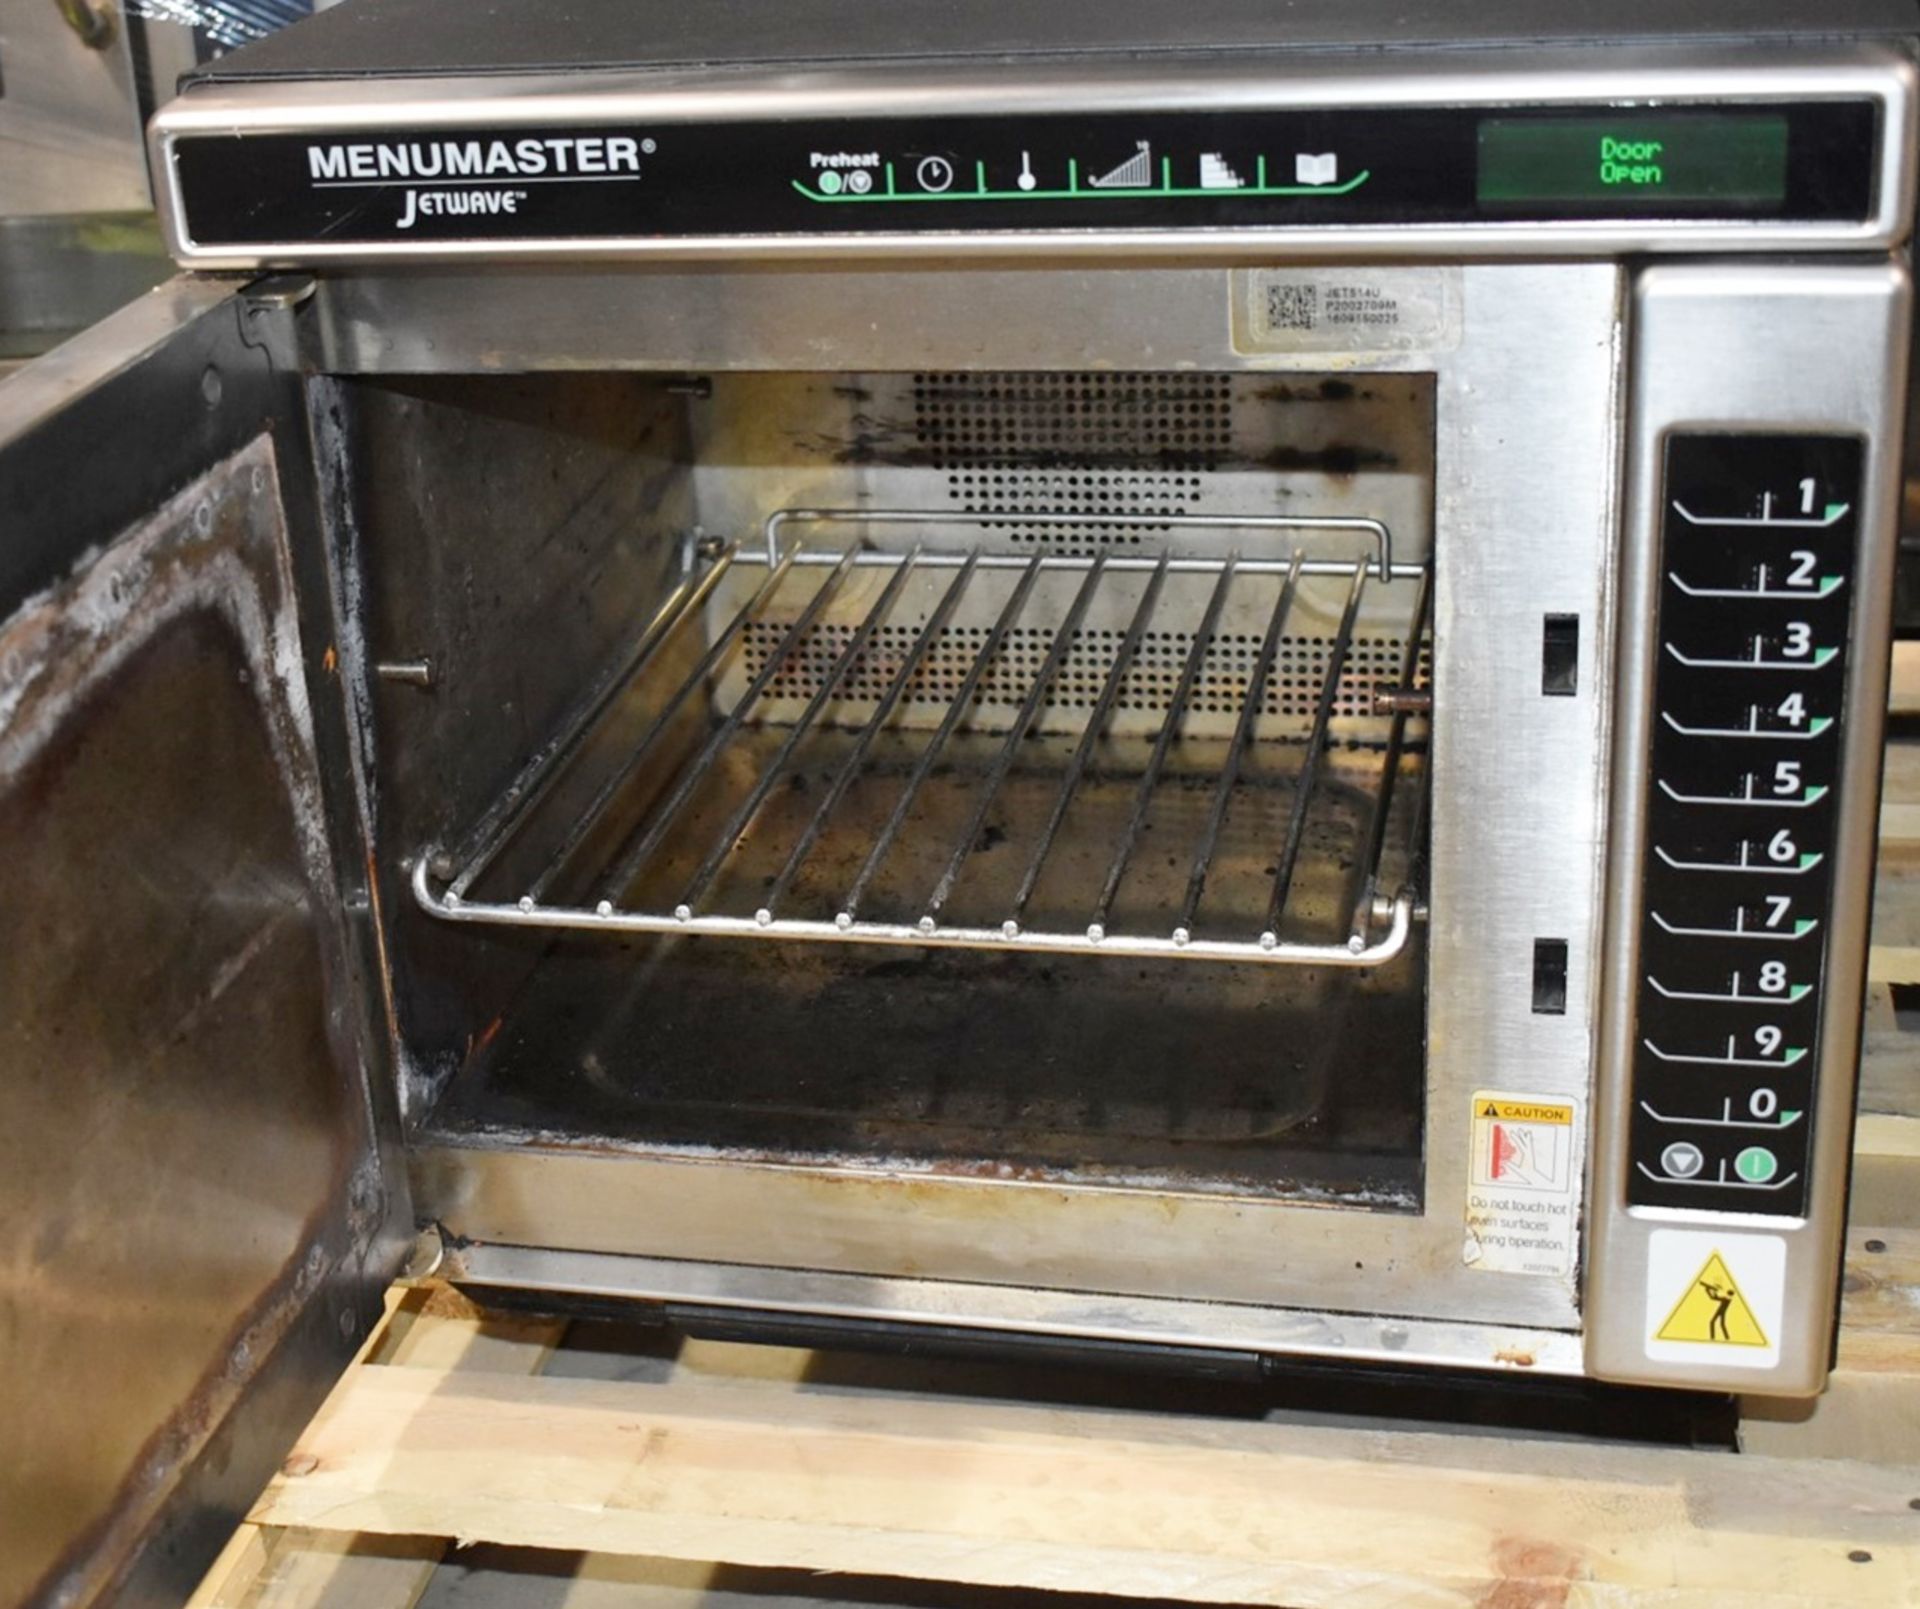 1 x Menumaster Jetwave JET514U High Speed Combination Microwave Oven - RRP £2,400 - Recently Removed - Image 4 of 8